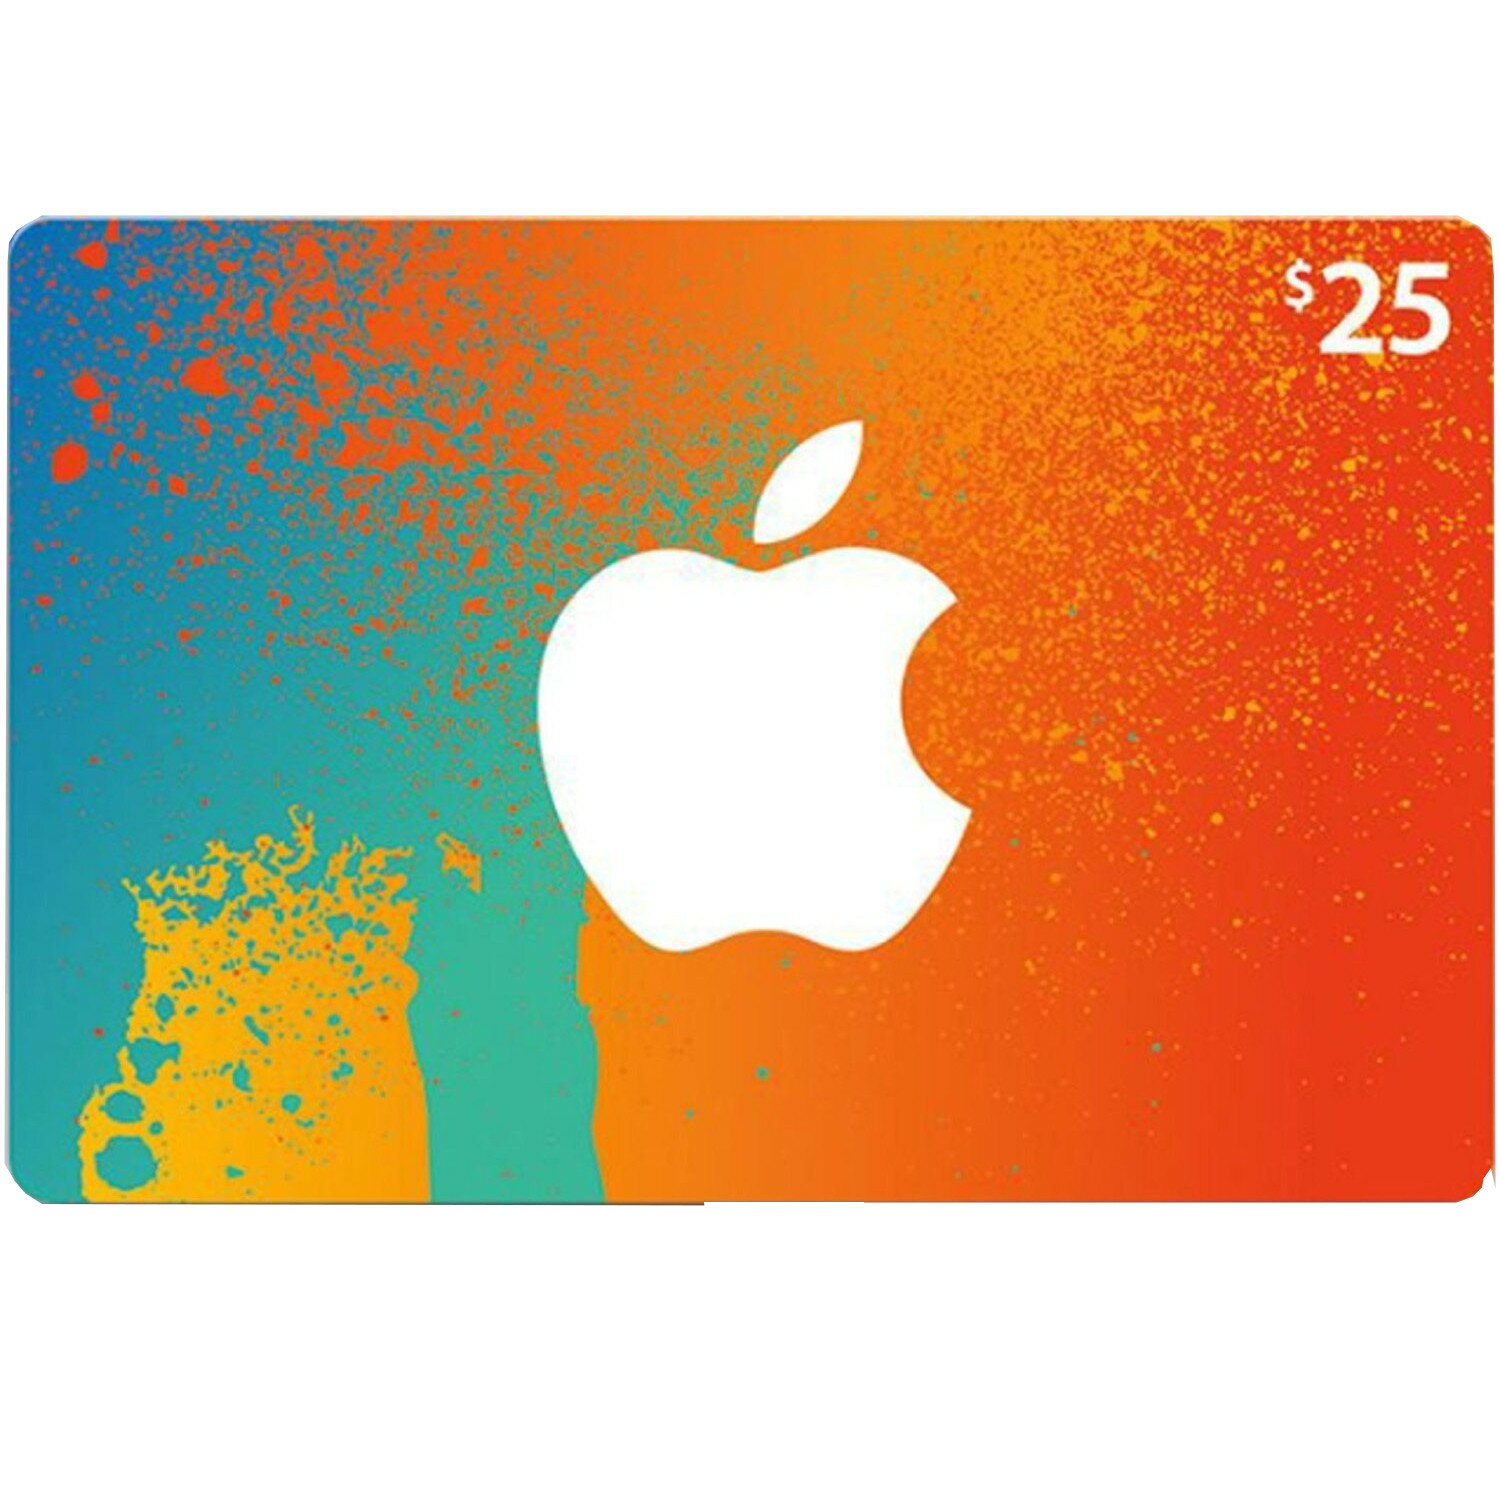 download the last version for ios Apple Gift Card